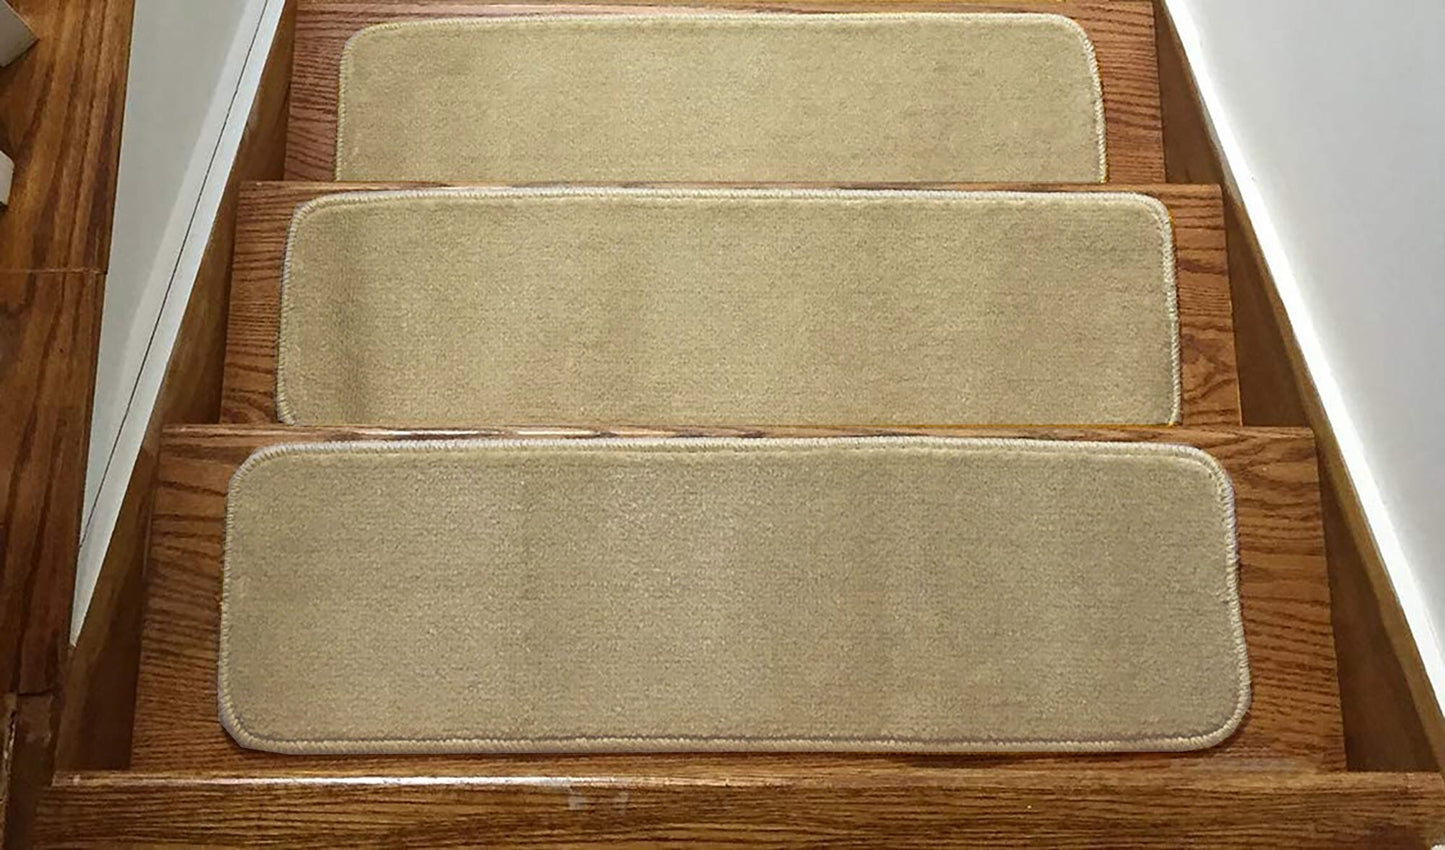 Machine Washable Slip Resistant Cream Stair Treads Soft Collection Indoor Stair Tread Noice Reducer Stair Protector Sizes 8.5"x30" , 7"x24"